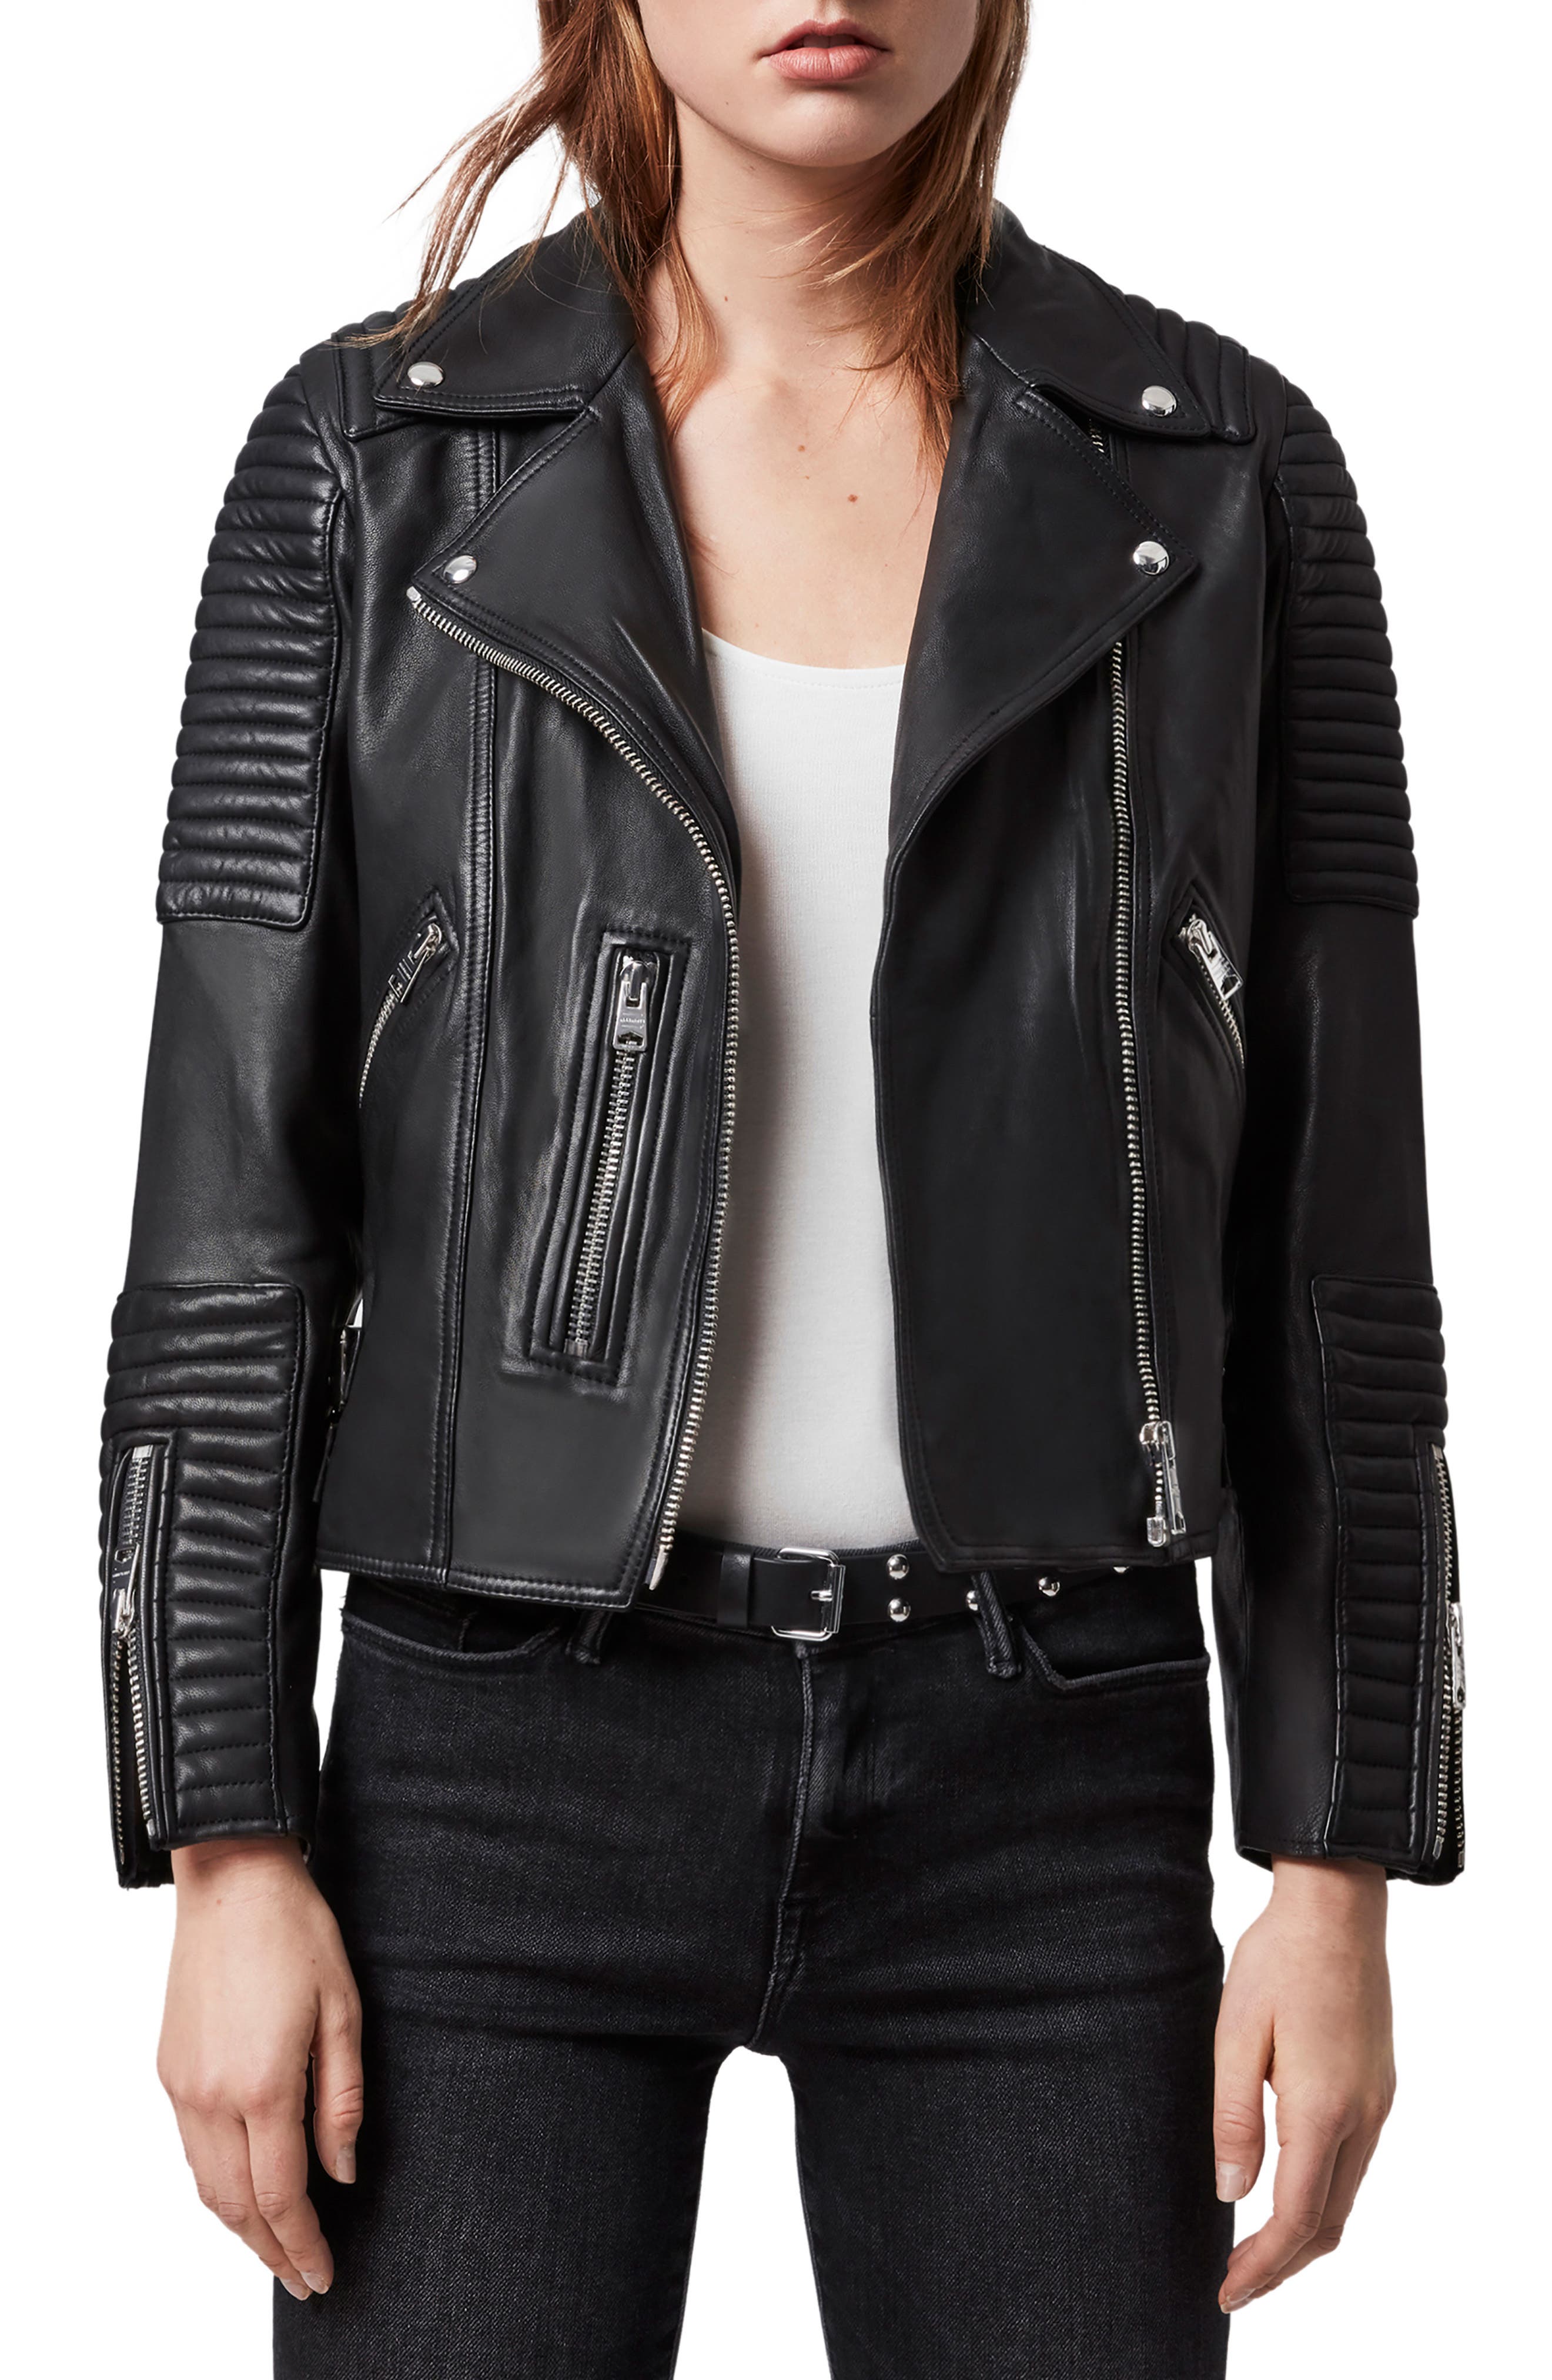 Allsaints Leather Jacket Top Sellers, UP TO 50% OFF | www 